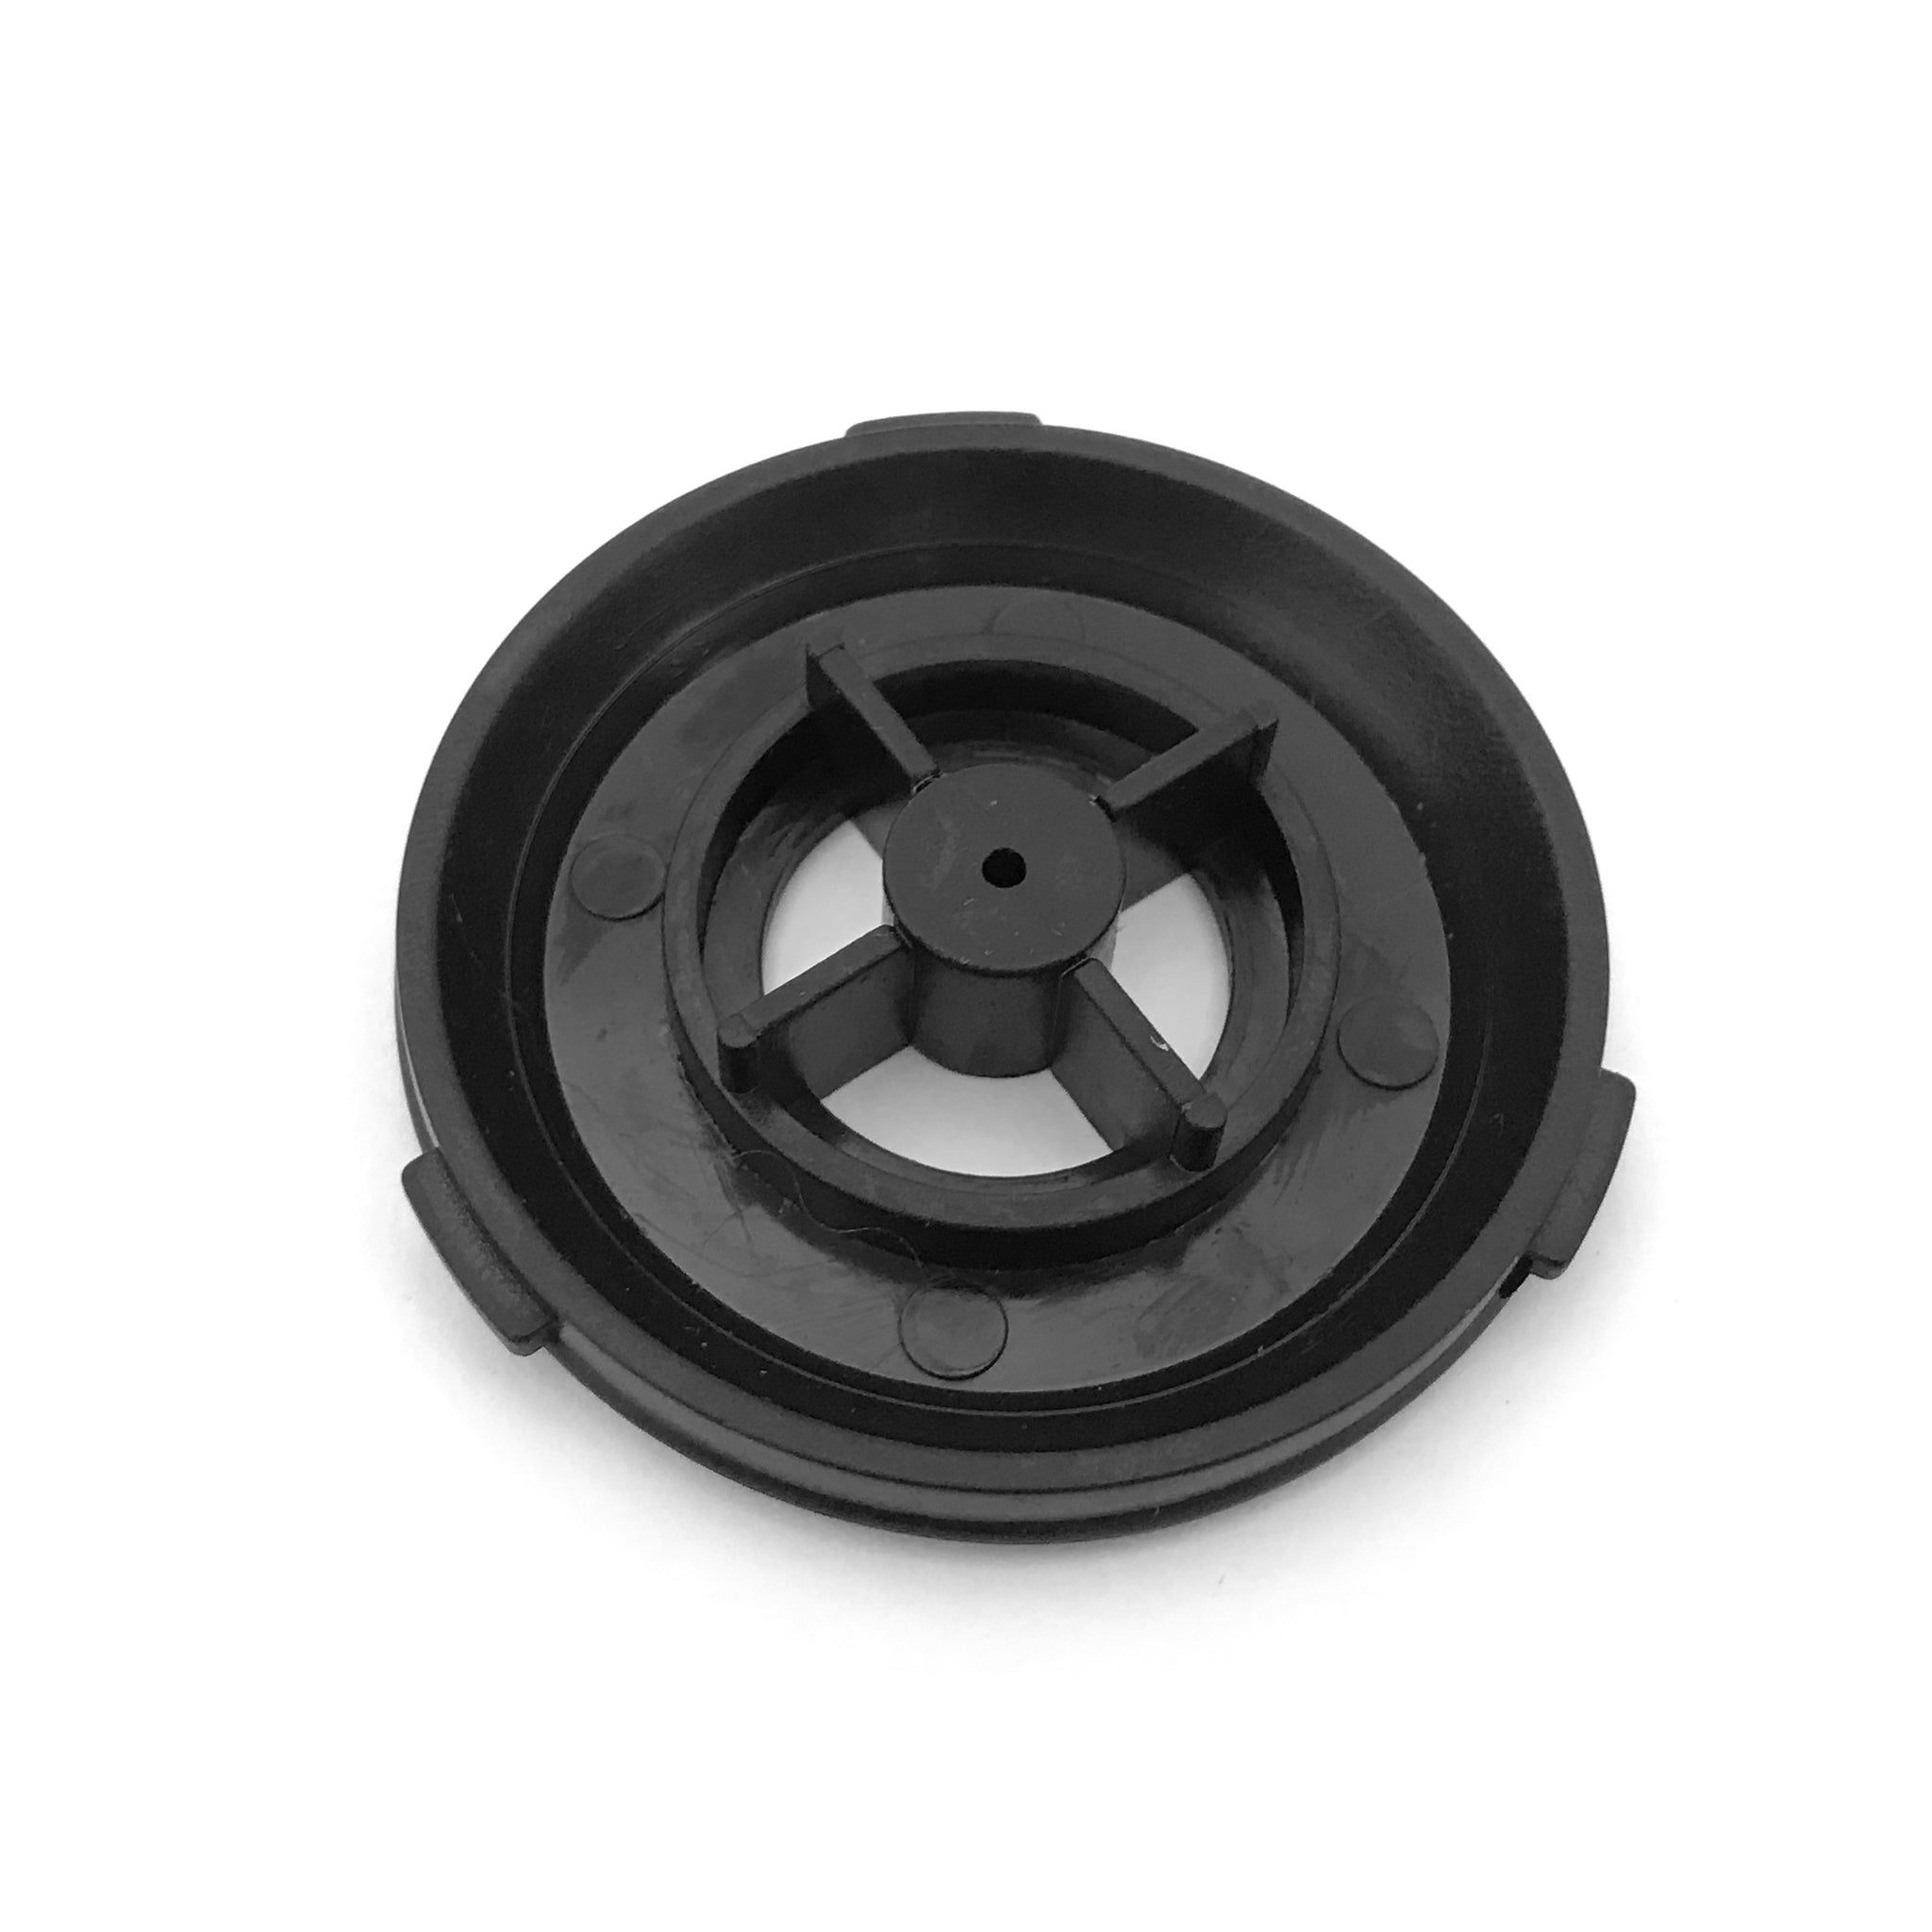 REPLACEMENT IMPELLER COVER & SEAL FOR SP-800